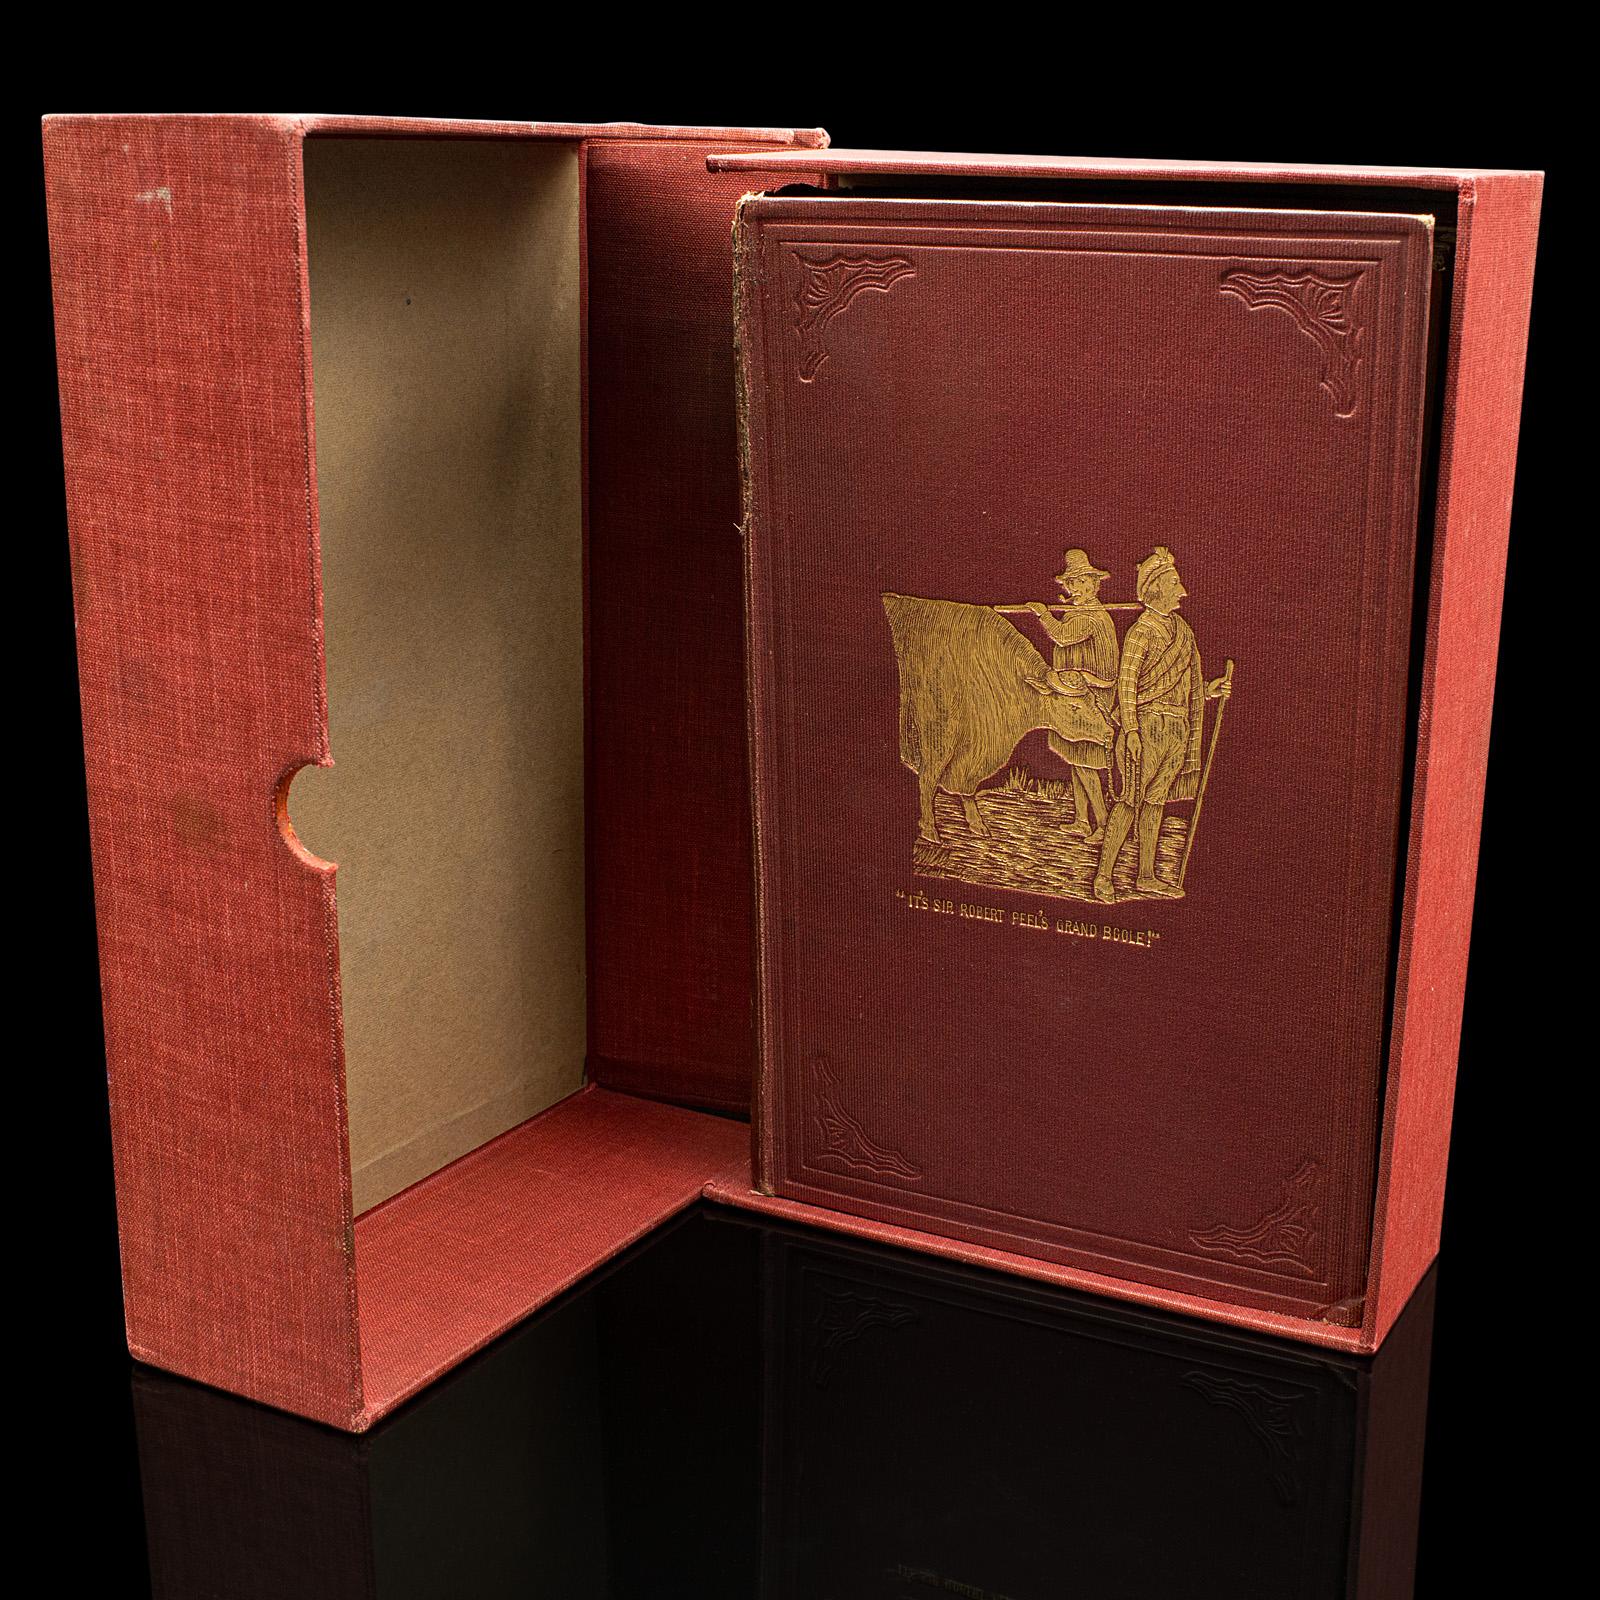 This is an antique cased copy of Hillingdon Hall or The Cockney Squire. An English language novel published in the Victorian era, this edition dated 1888.

Originally written in 1845, Hillingdon Hall is a satirical account of a local grocer and his